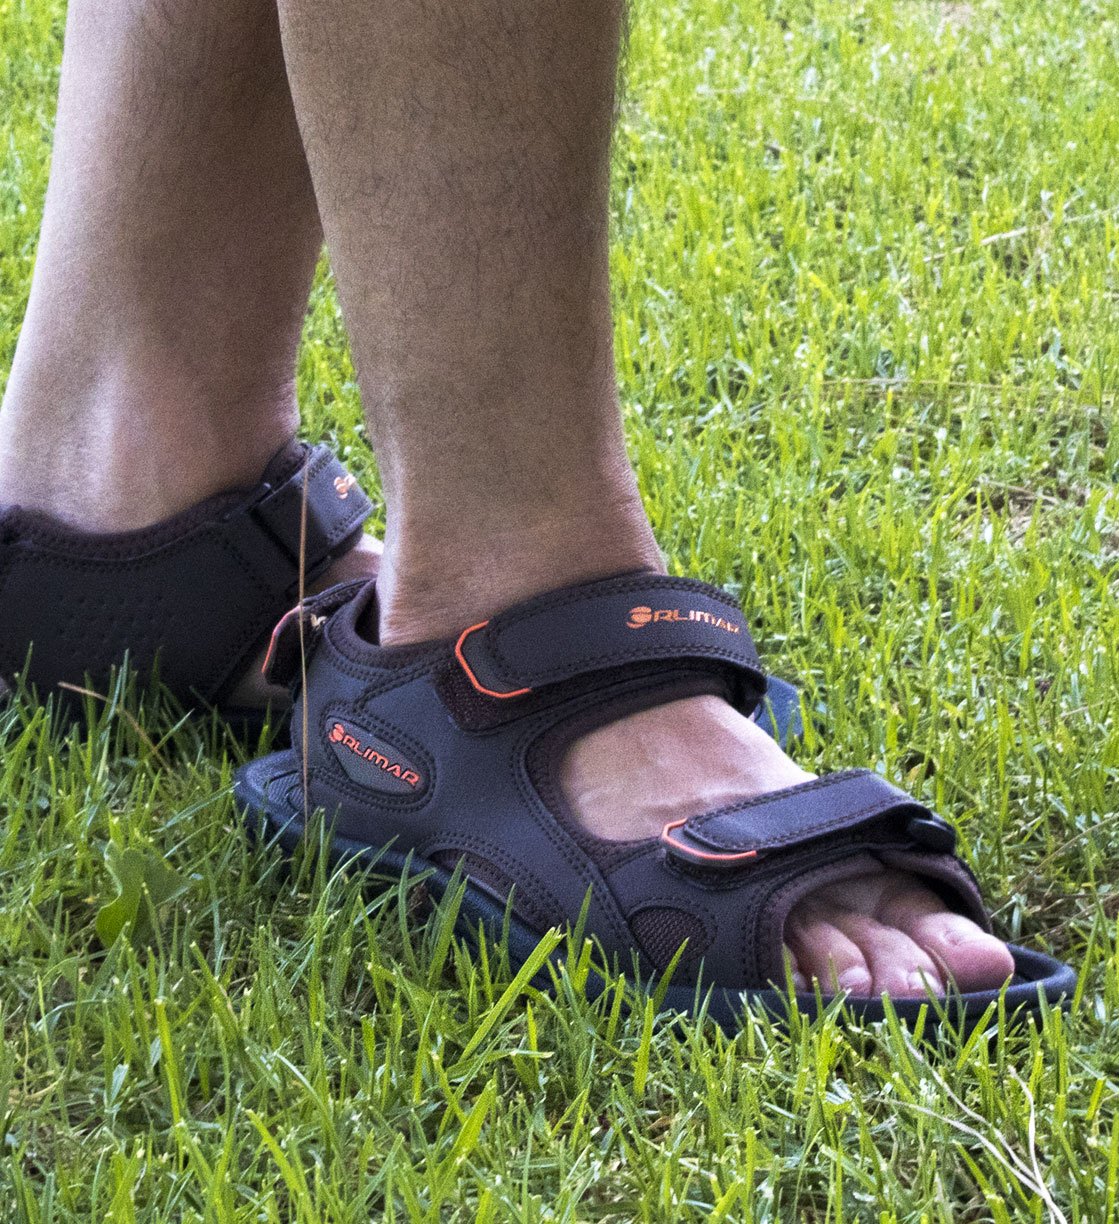 someone wearing Orlimar's men's spikeless golf sandals in the rough